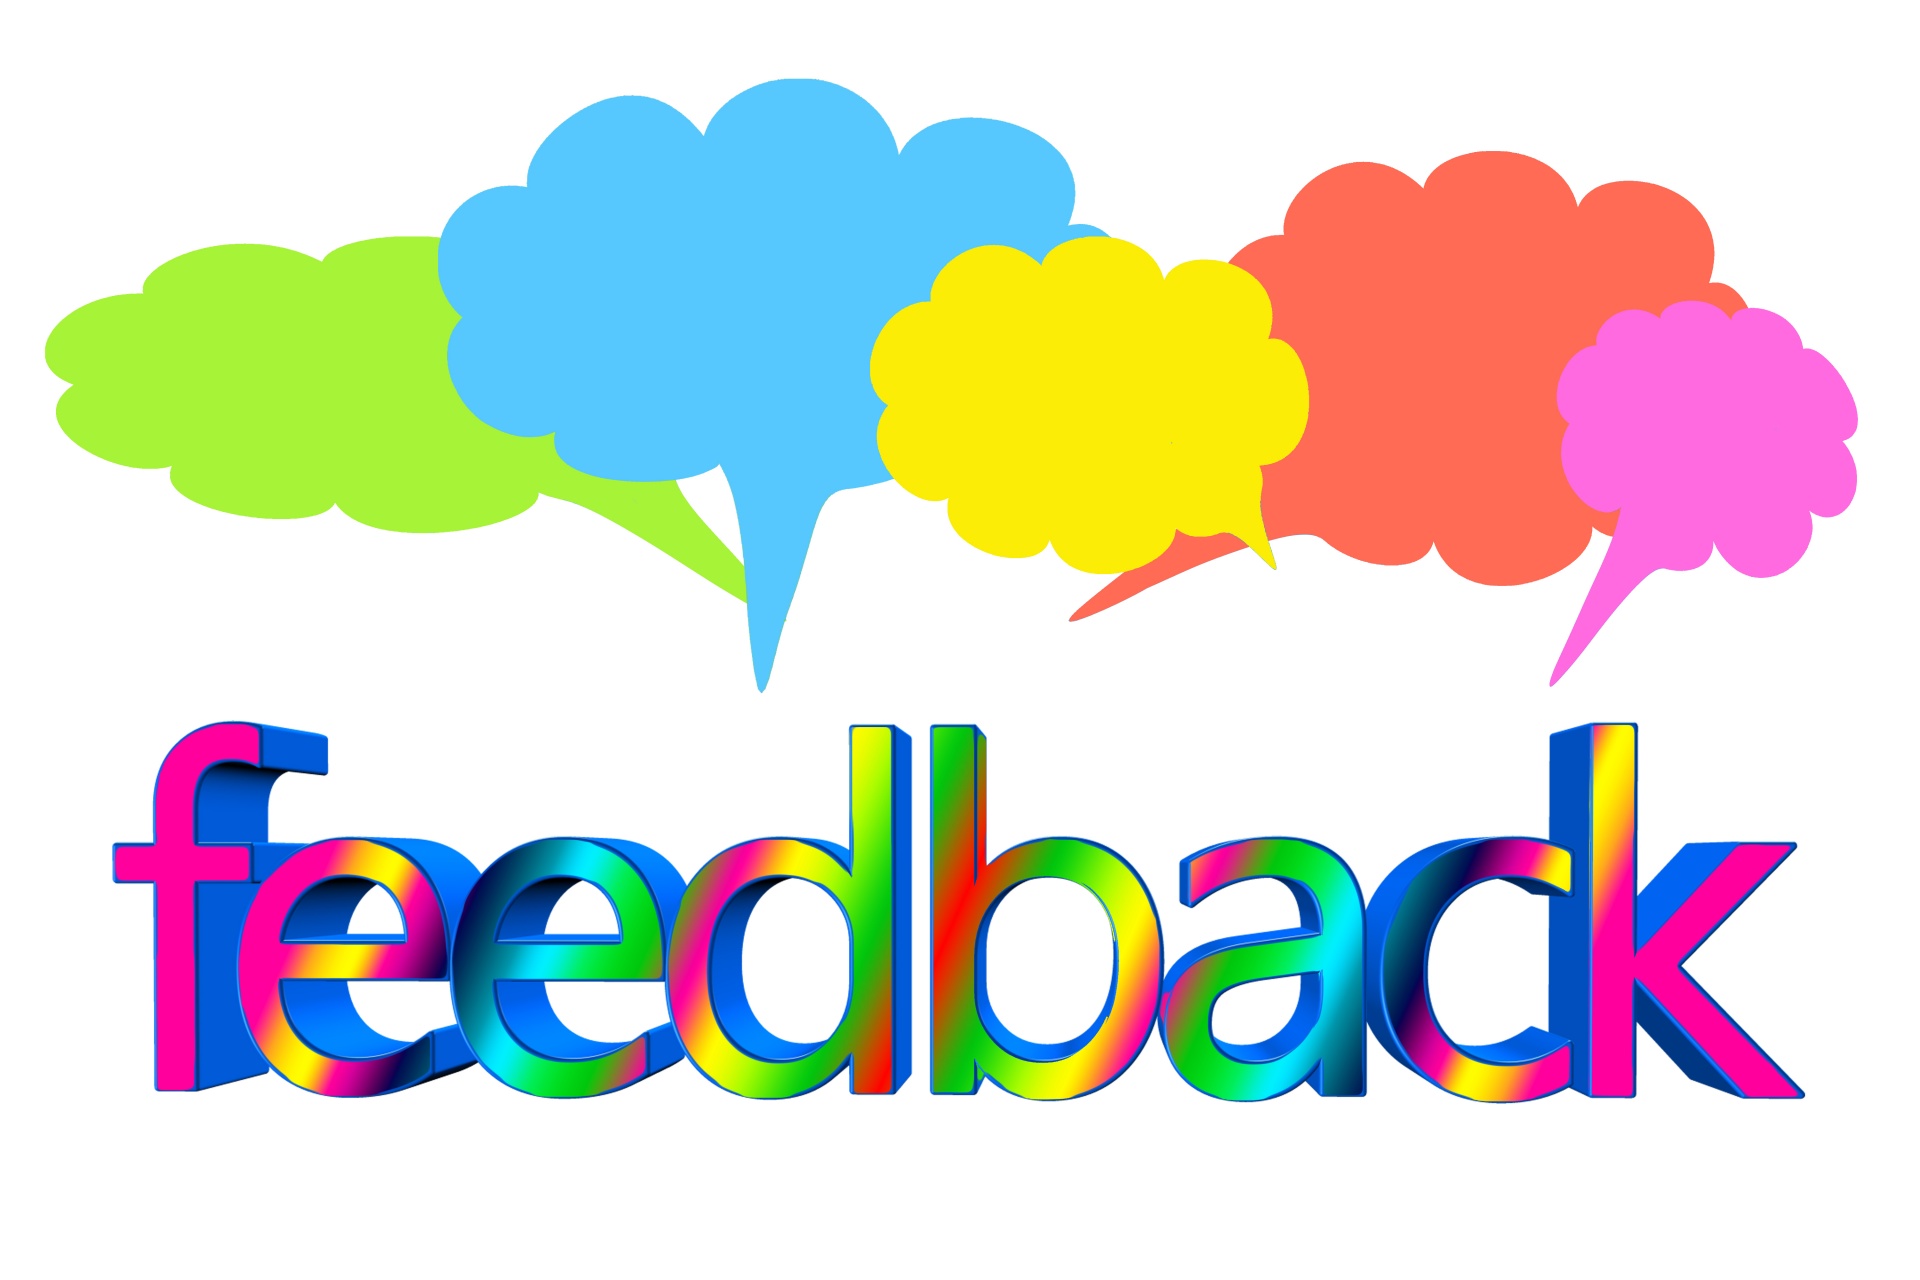 feedback thought bubbles